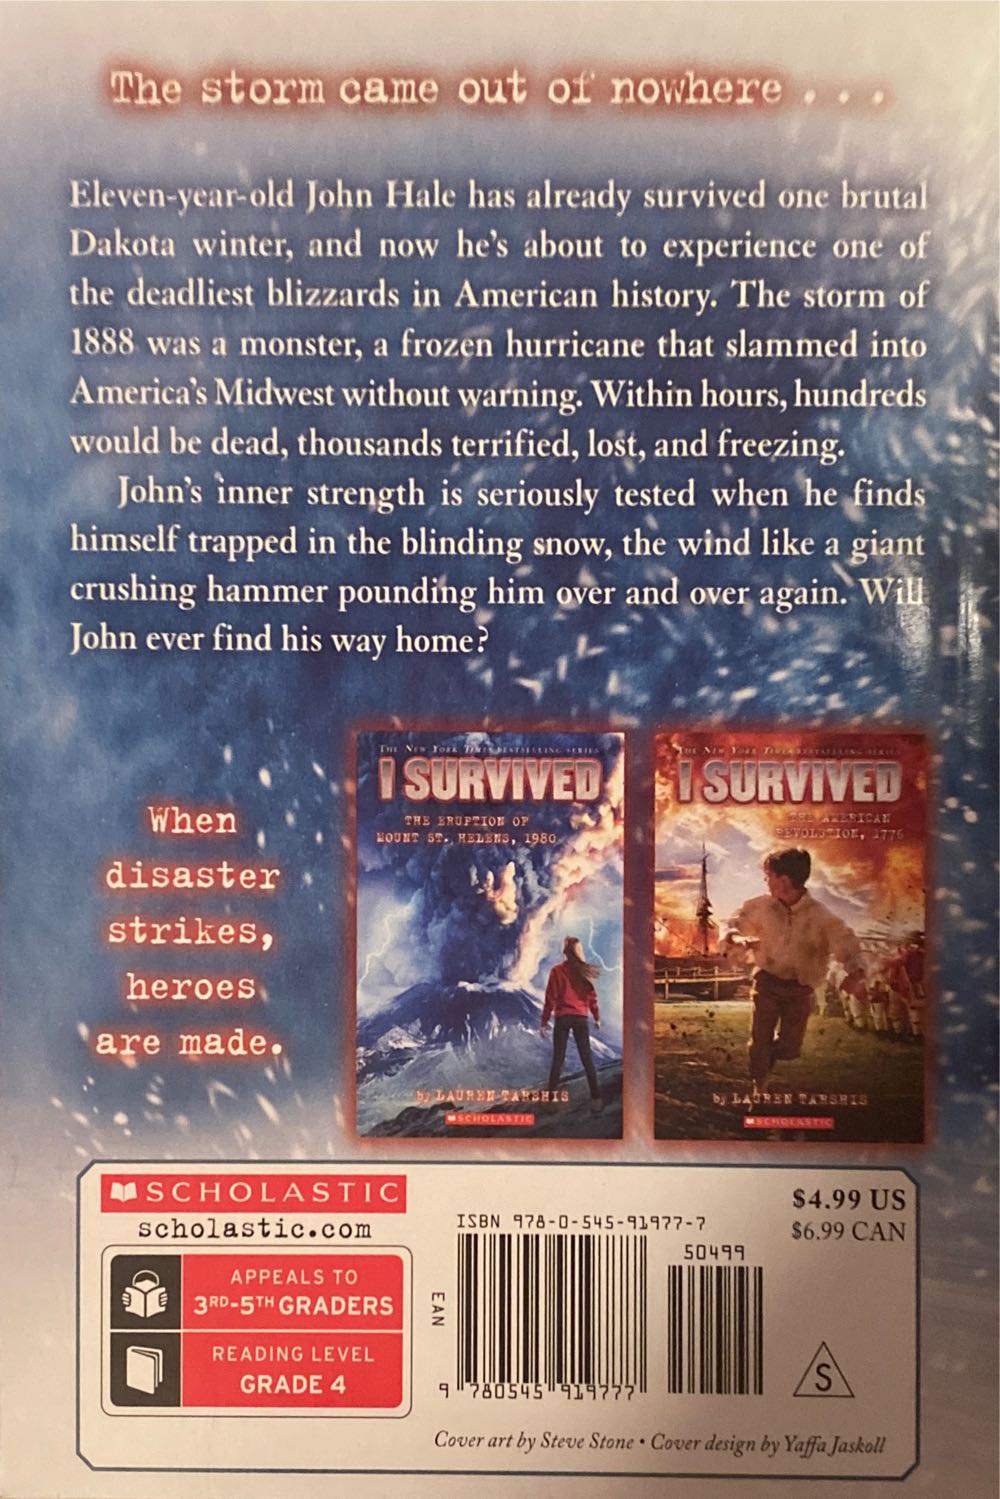 I Survived The Children’s Blizzard, 1888 - Lauren Tarshis (Scholastic paperback - Paperback) book collectible [Barcode 9780545919777] - Main Image 2